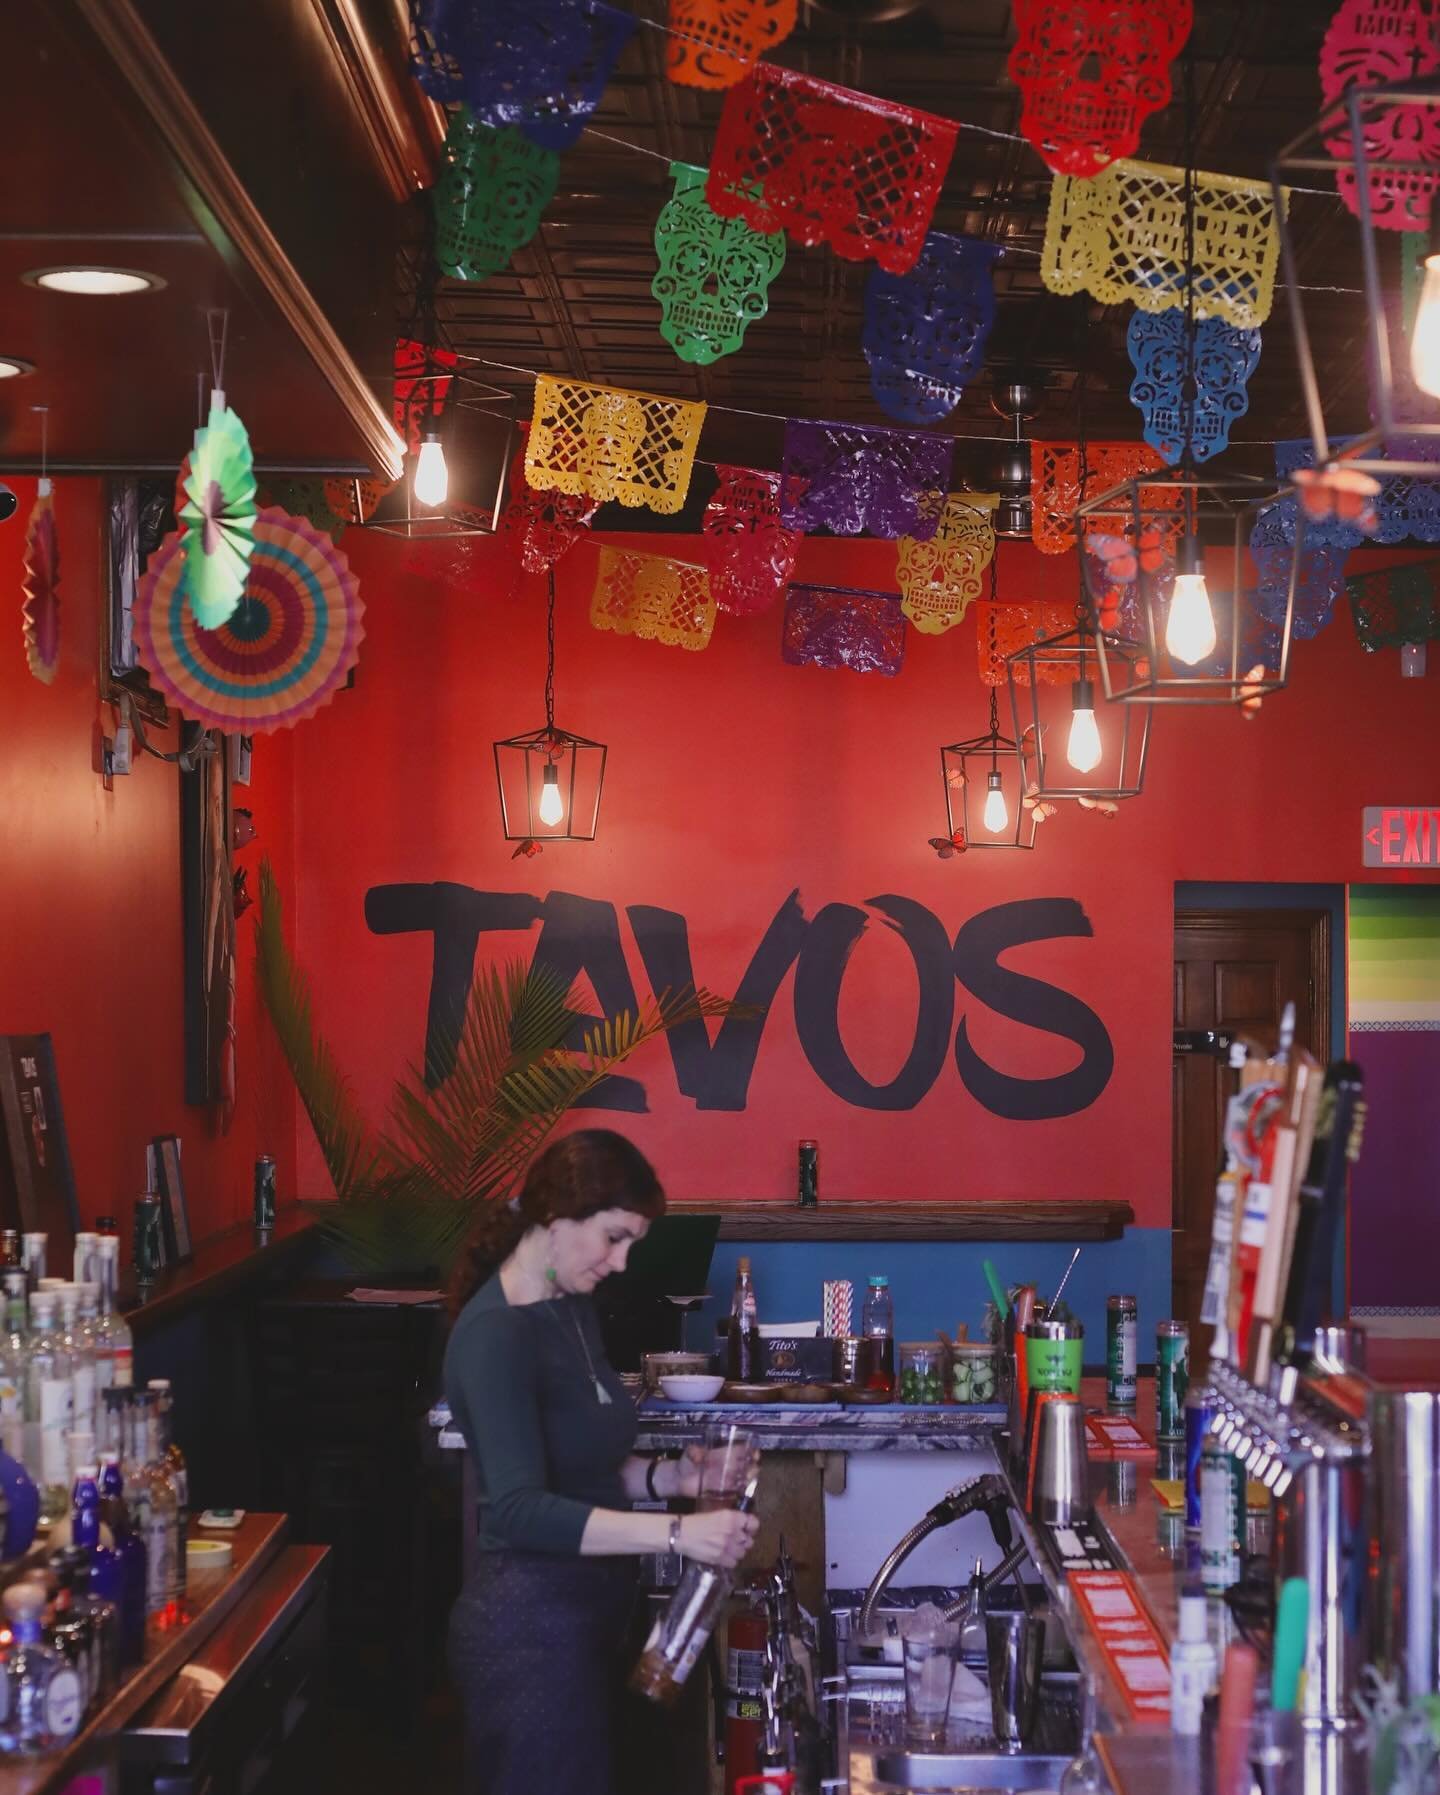 Celebrate Cinco de Mayo with us TODAY! Enjoy $5 margaritas, cerveza buckets, giveaways, and more! Let&rsquo;s party together! 🌮🍹 #CincoDeMayo #TavosRoc